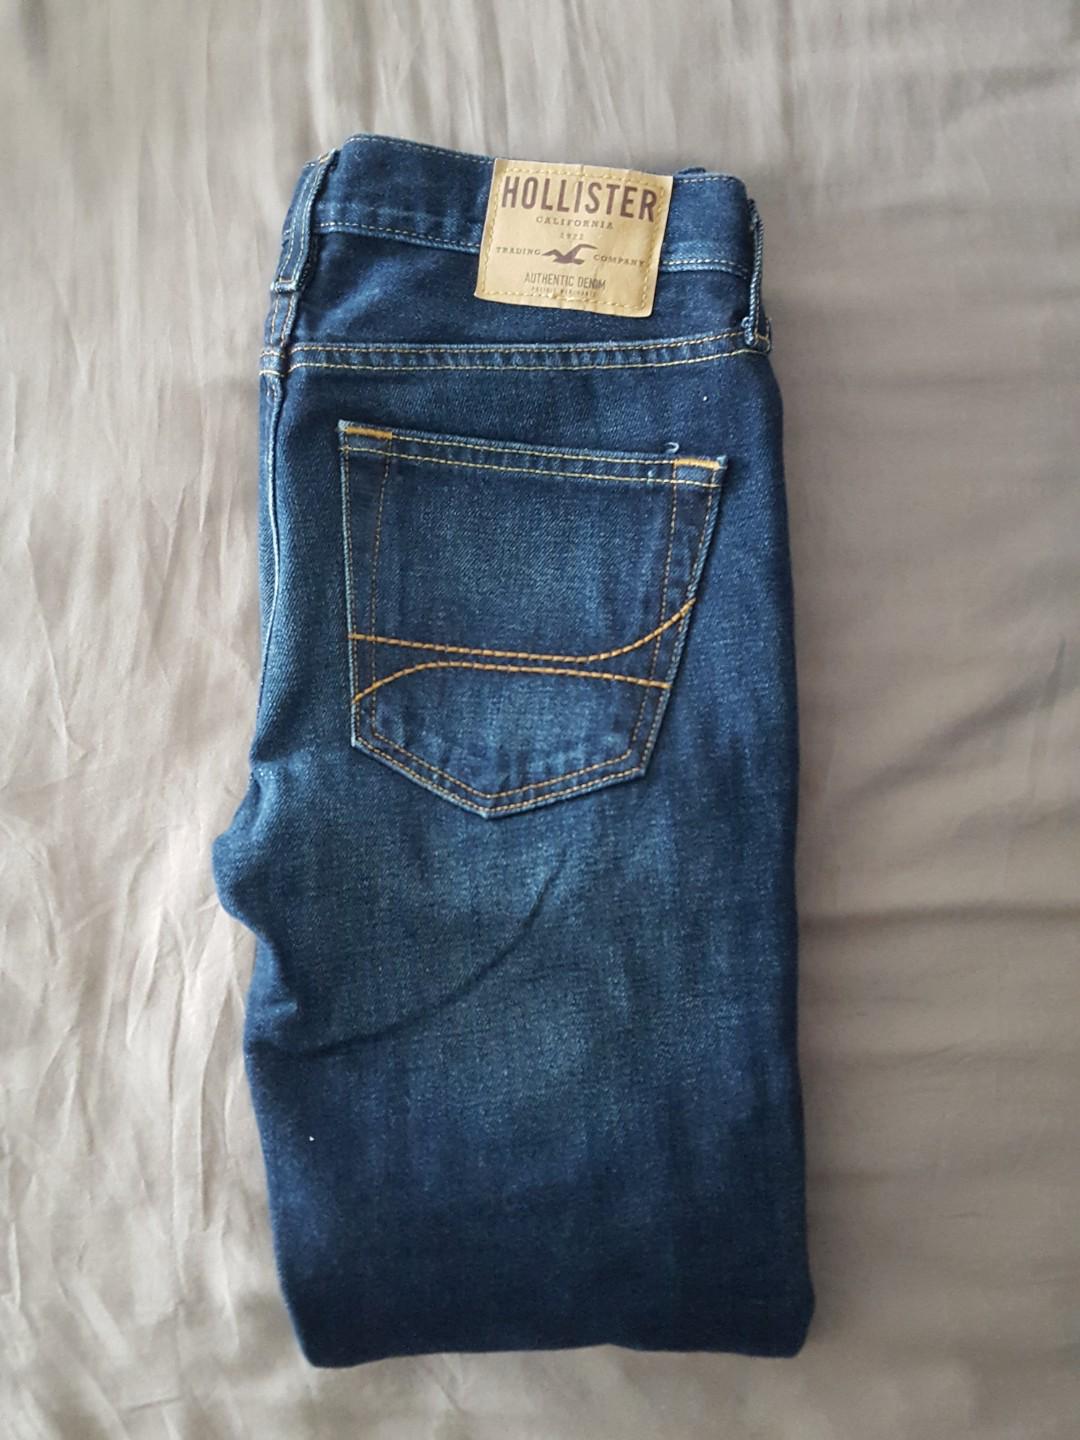 hollister jeans for guys